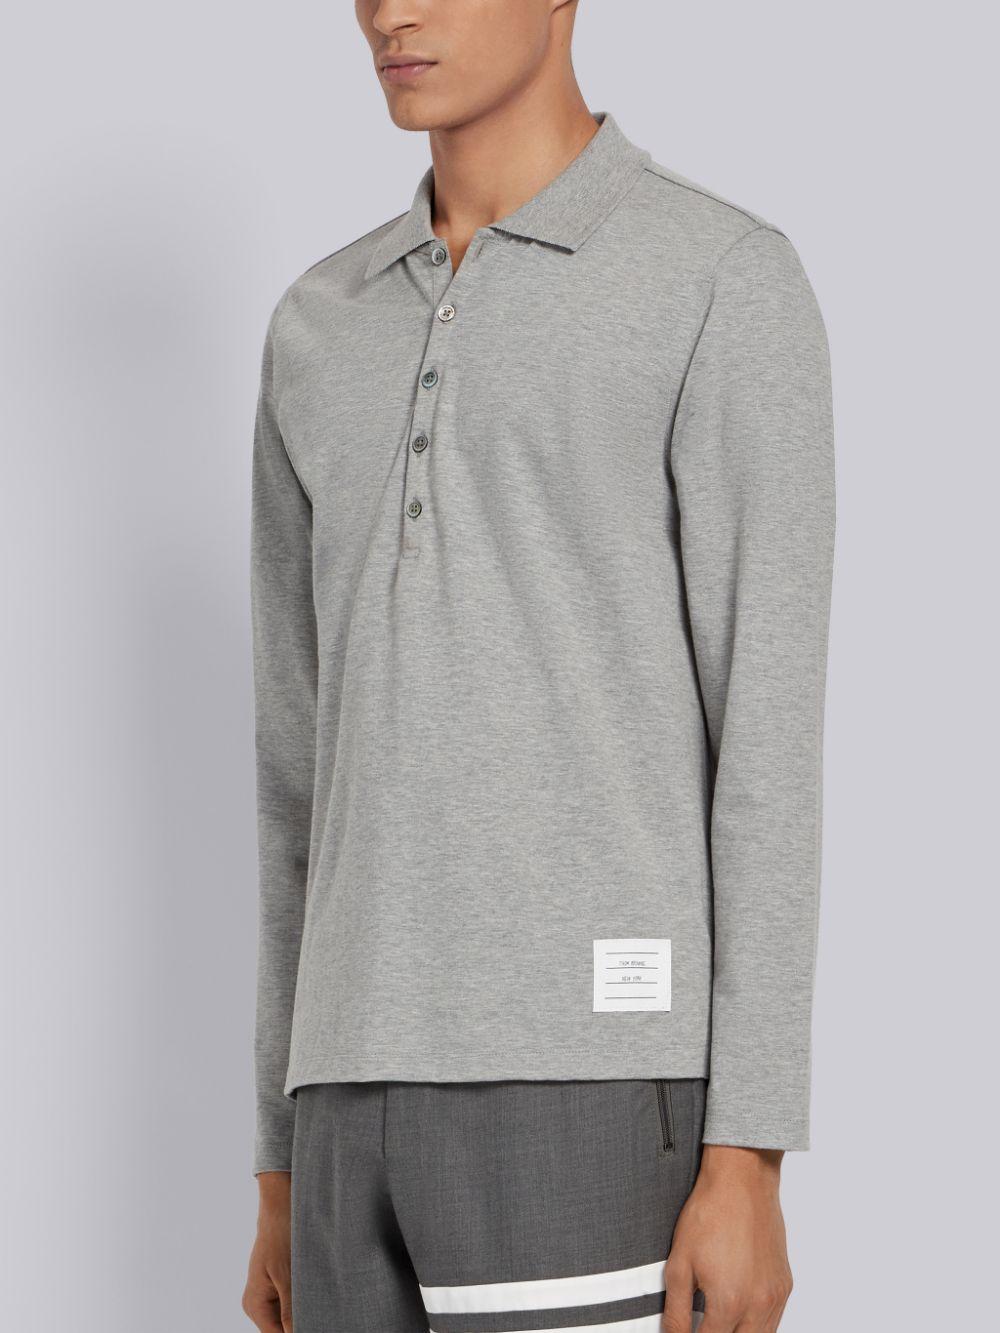 Thom Browne Long Sleeve Jersey Polo in Grey (Gray) for Men - Lyst